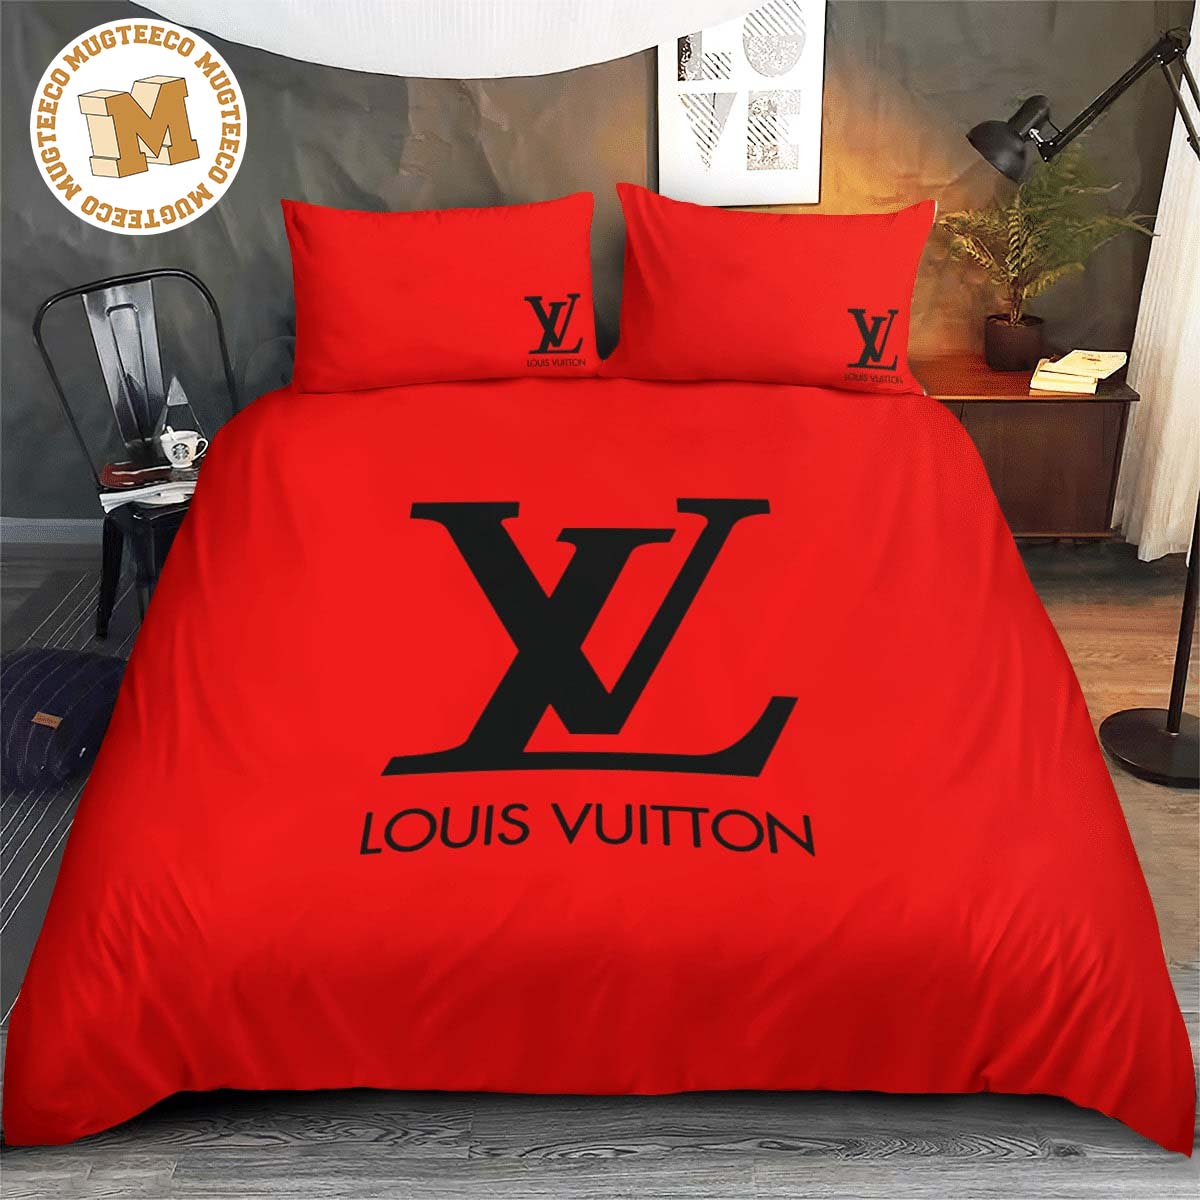 Red & white louis bedset